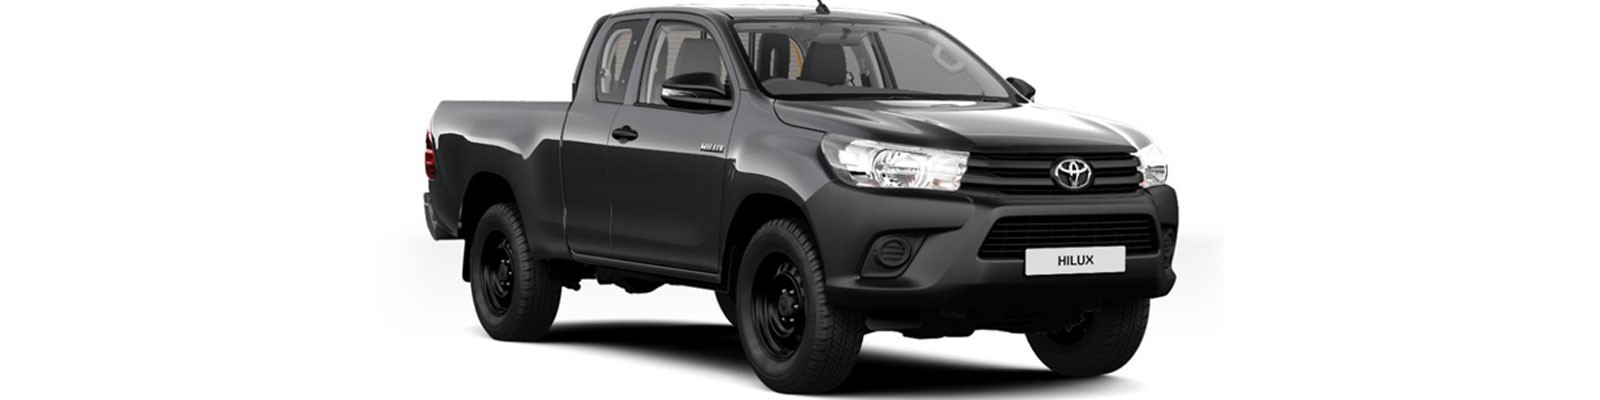 Accessories for Toyota Hilux Extra Cab 2016-2020